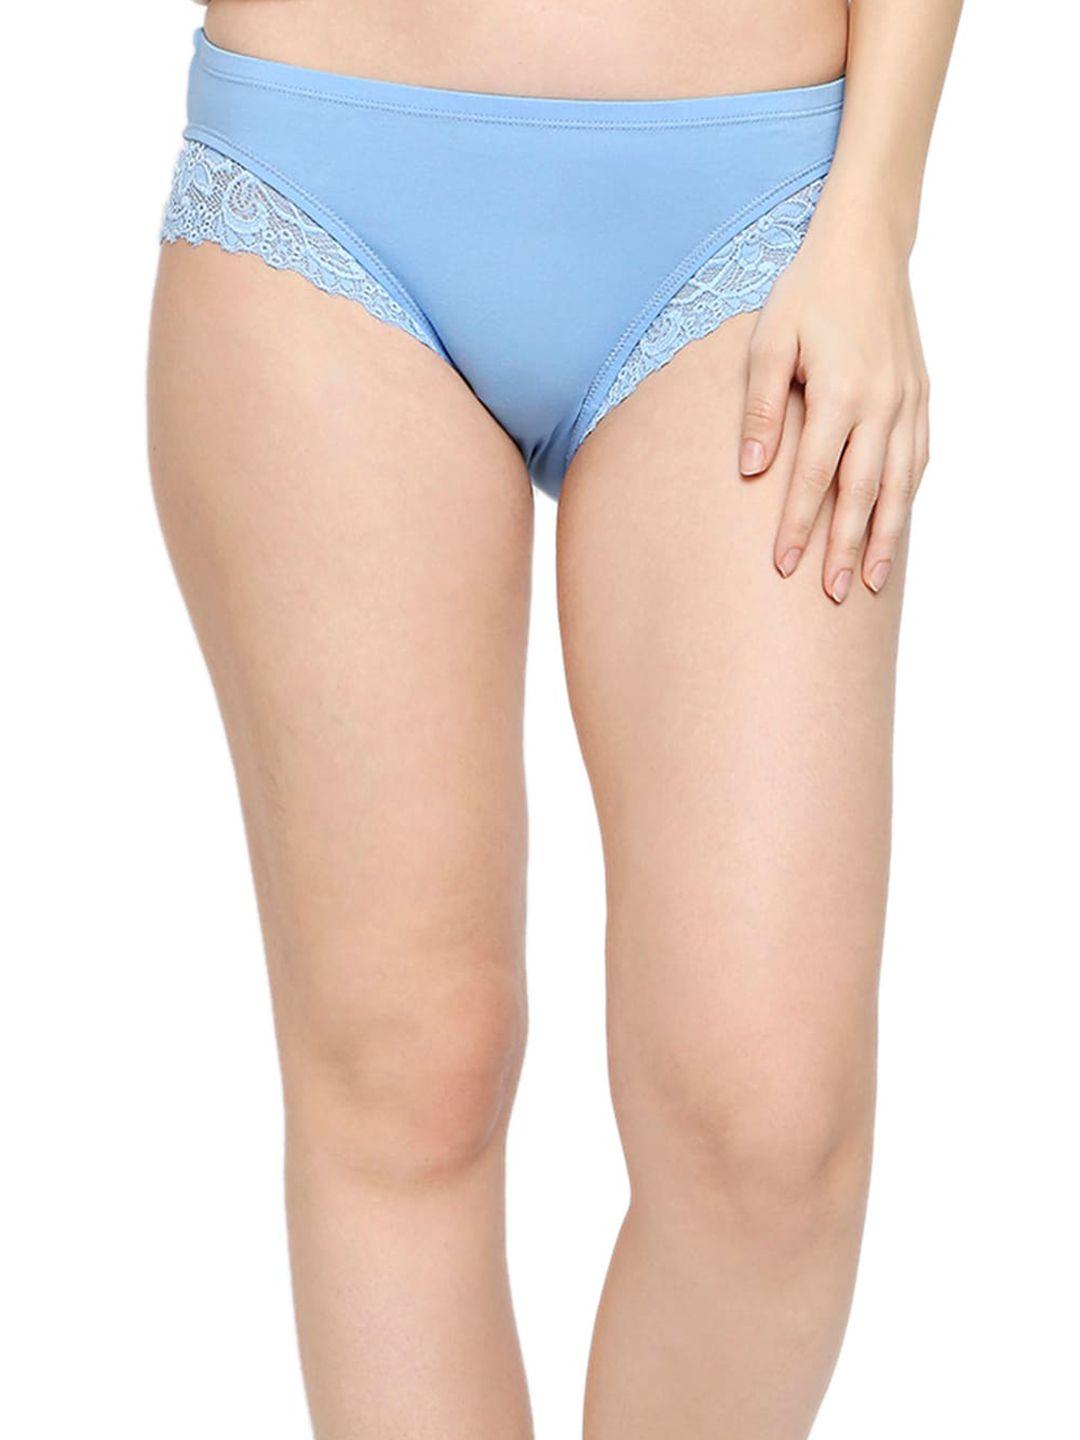 redrose-women-blue-solid-lace-hipster-briefs